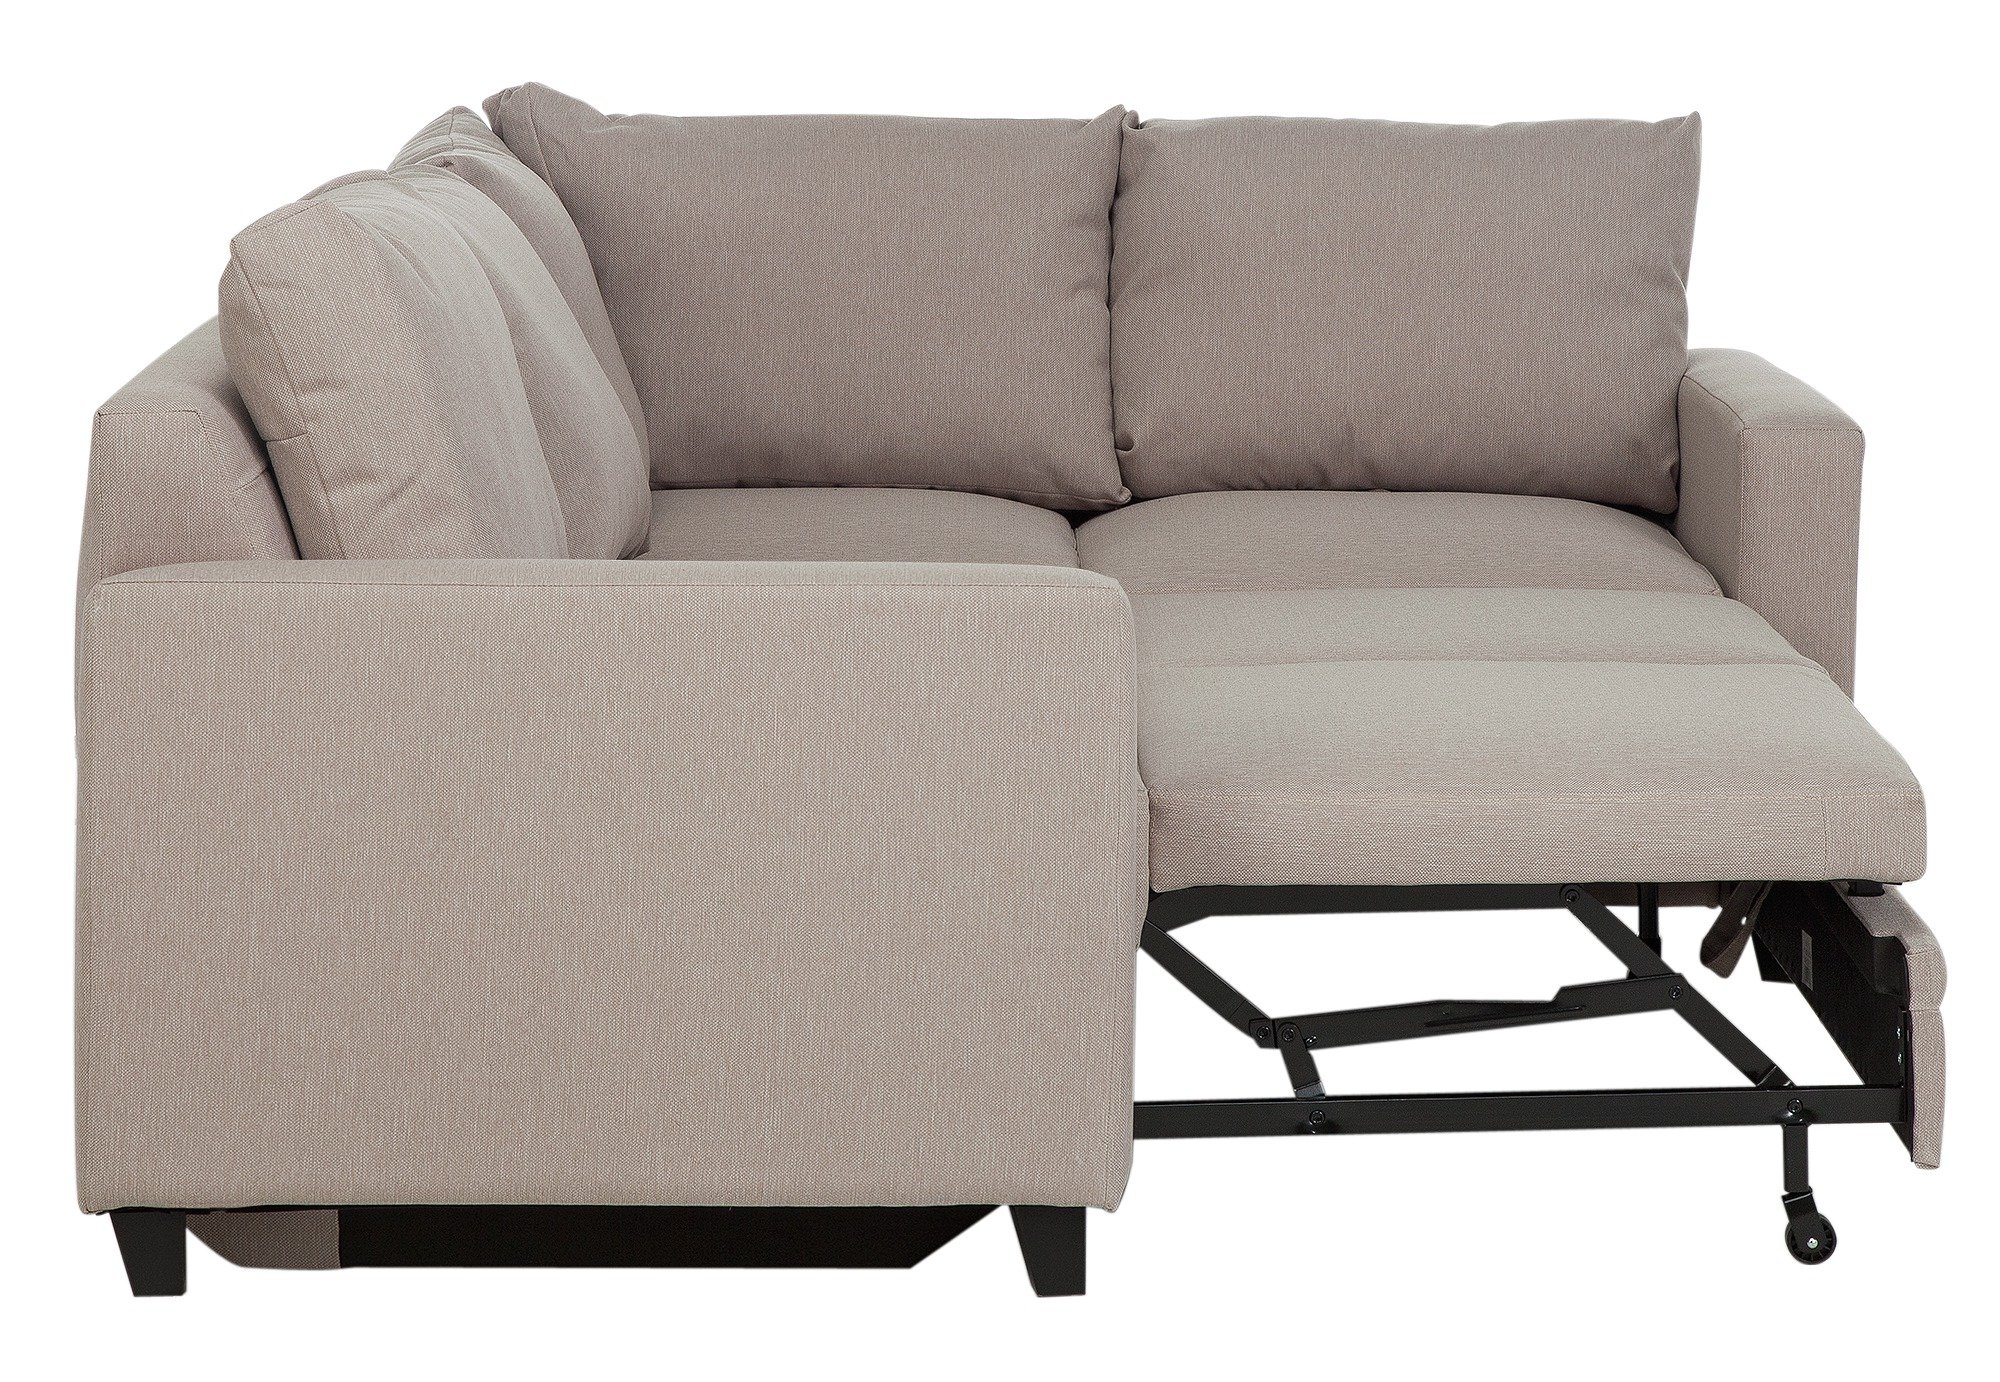 hygena seattle sofa bed review